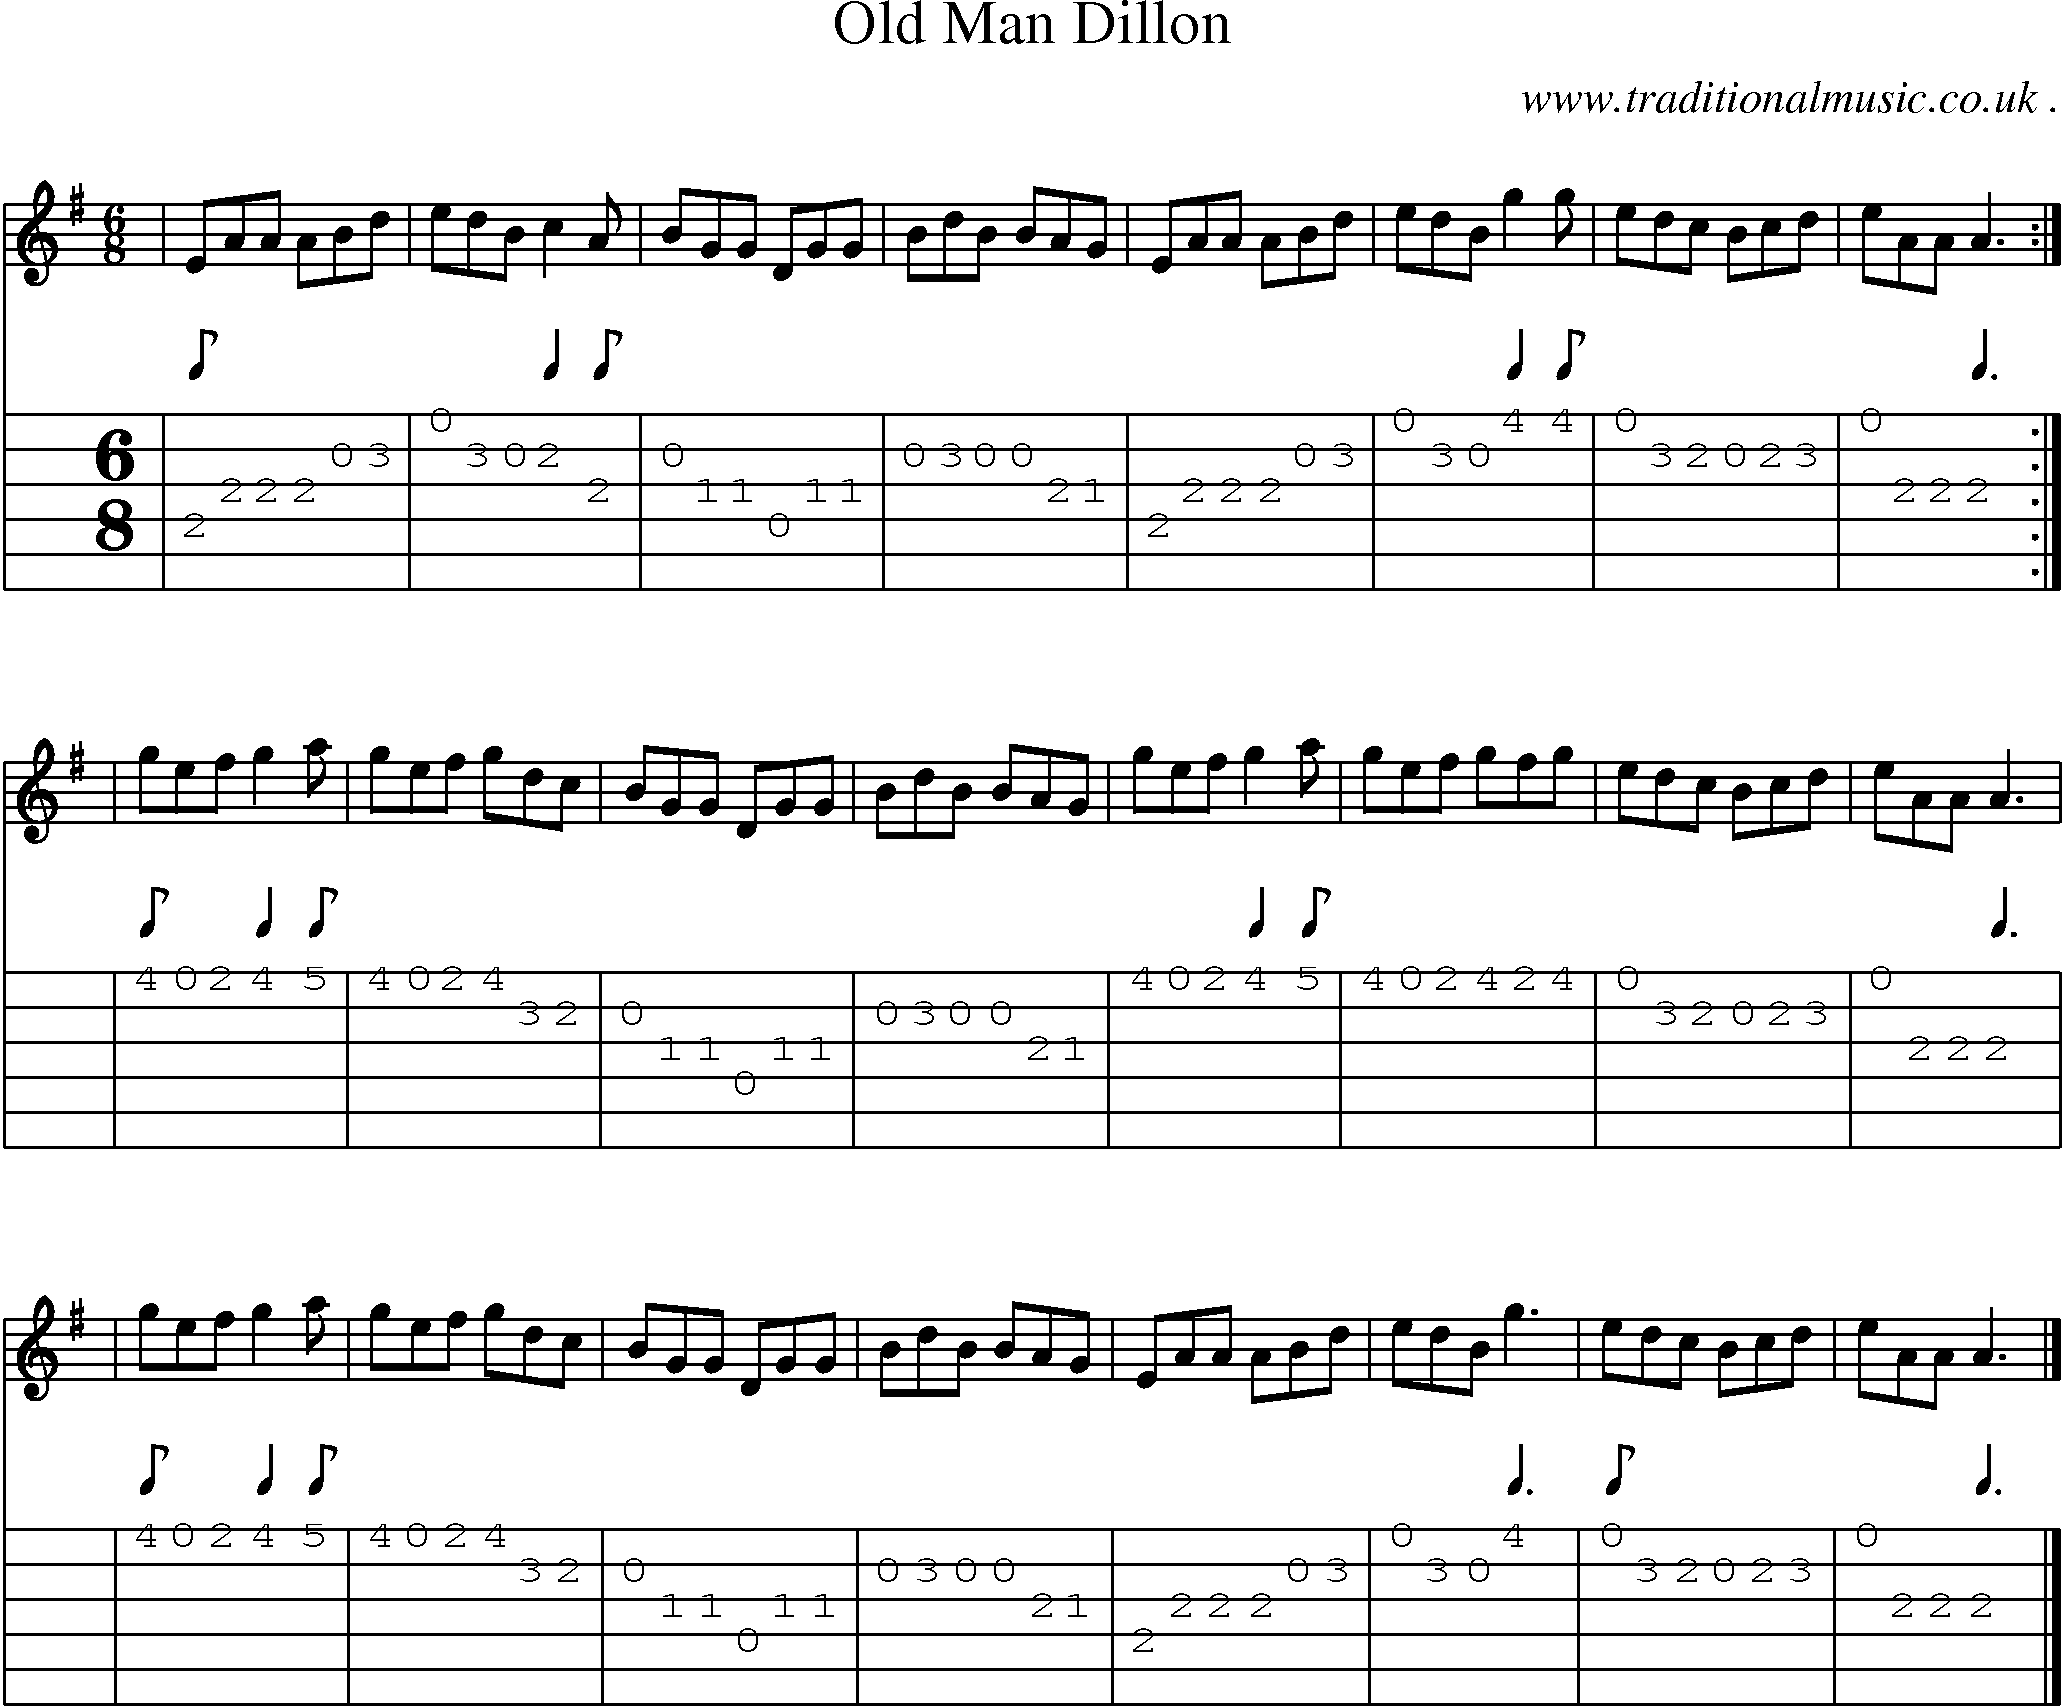 Sheet-music  score, Chords and Guitar Tabs for Old Man Dillon